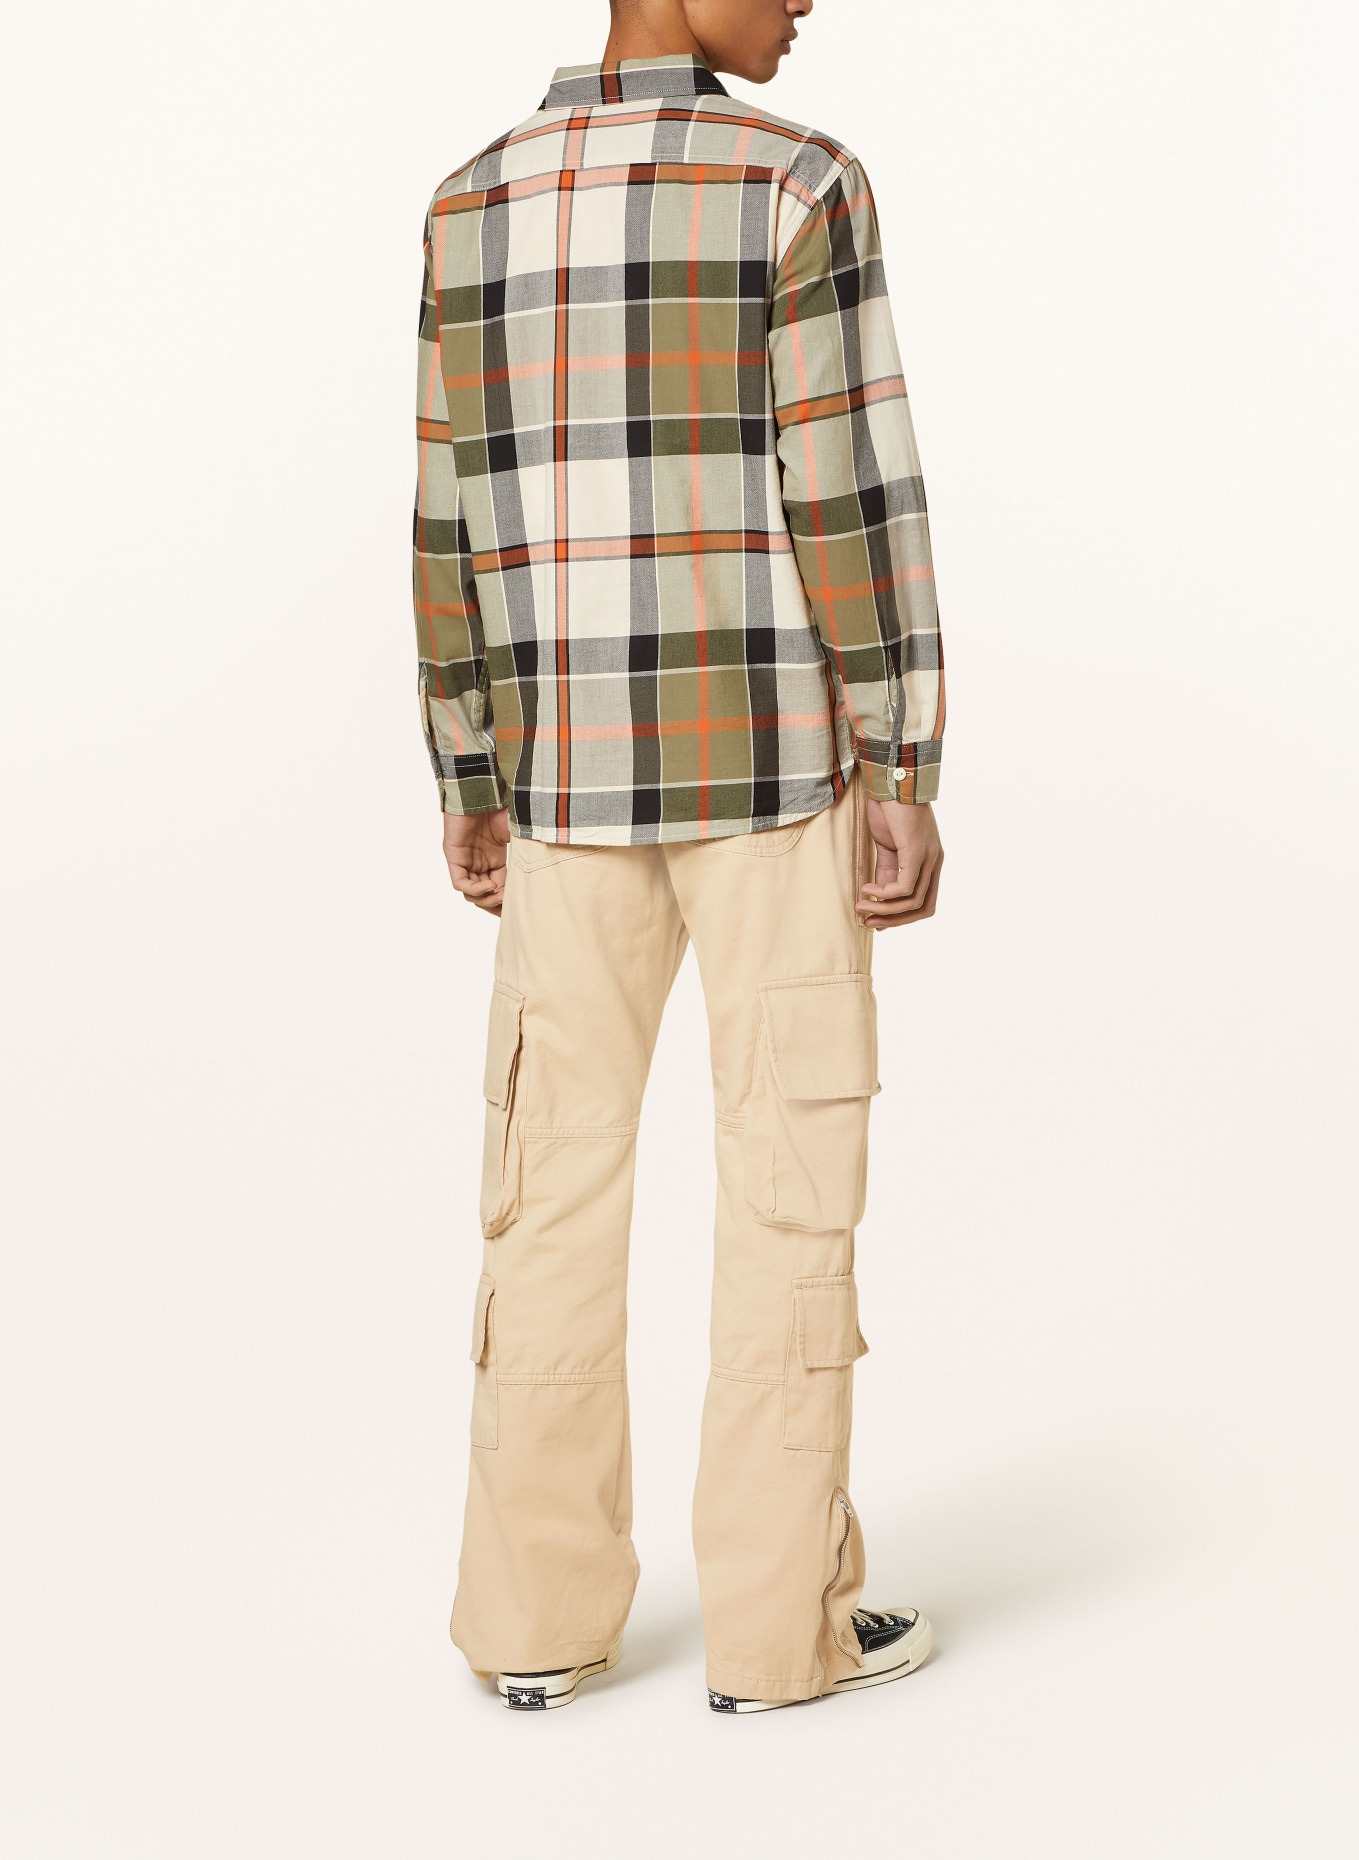 Levi's® Shirt THE WORKER relaxed fit, Color: OLIVE/ CREAM/ ORANGE (Image 3)